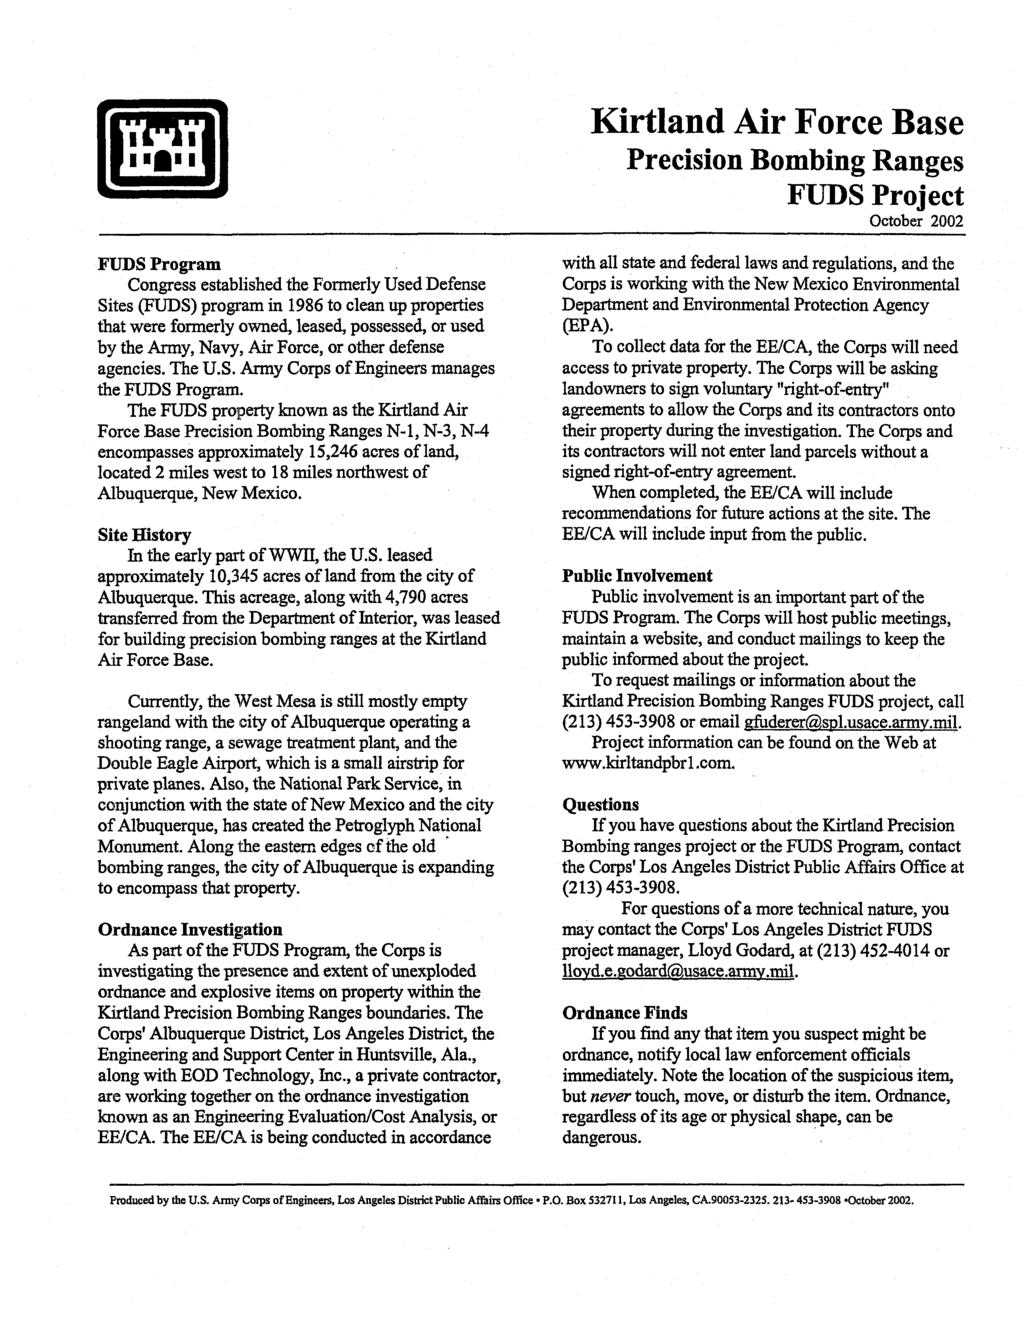 Kirtland Air Force Base Precision Bombing Ranges FUDS Project October 2002 FUDS Program Congress established the Formerly Used Defense Sites (FUDS) program in 1986 to clean up properties that were